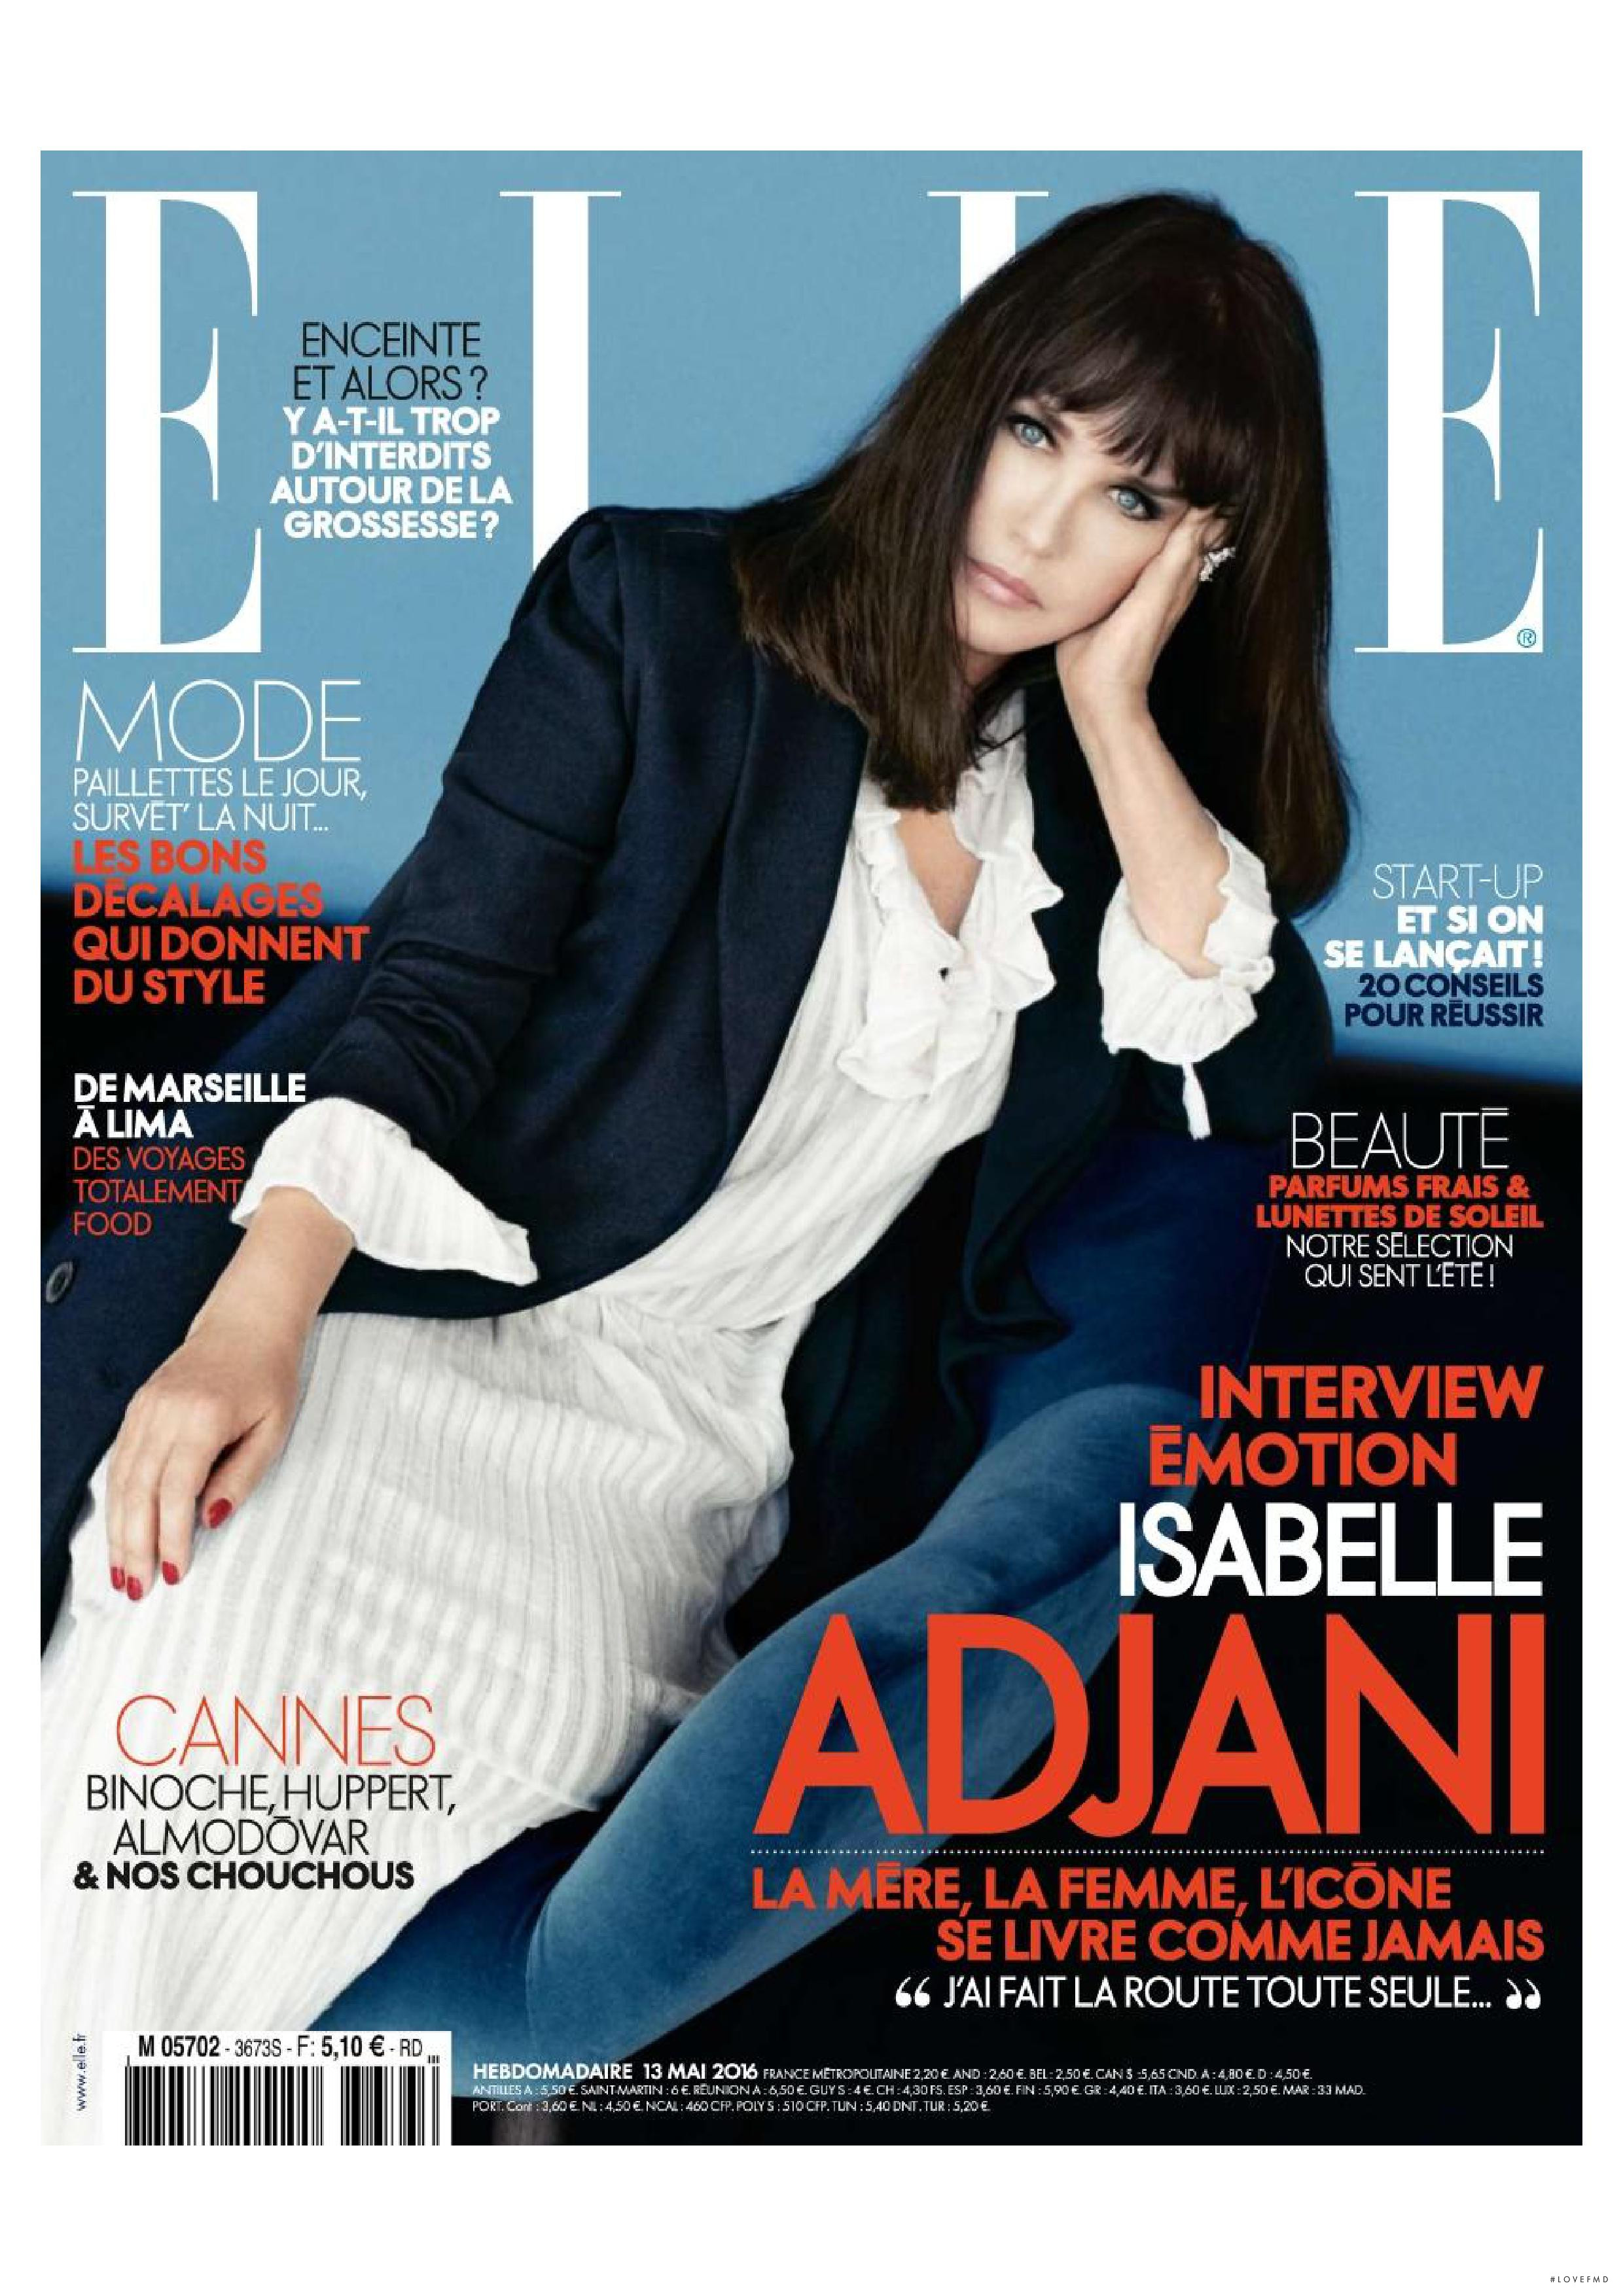 Cover of Elle France with Isabelle Adjani, May 2016 (ID:47383 ...